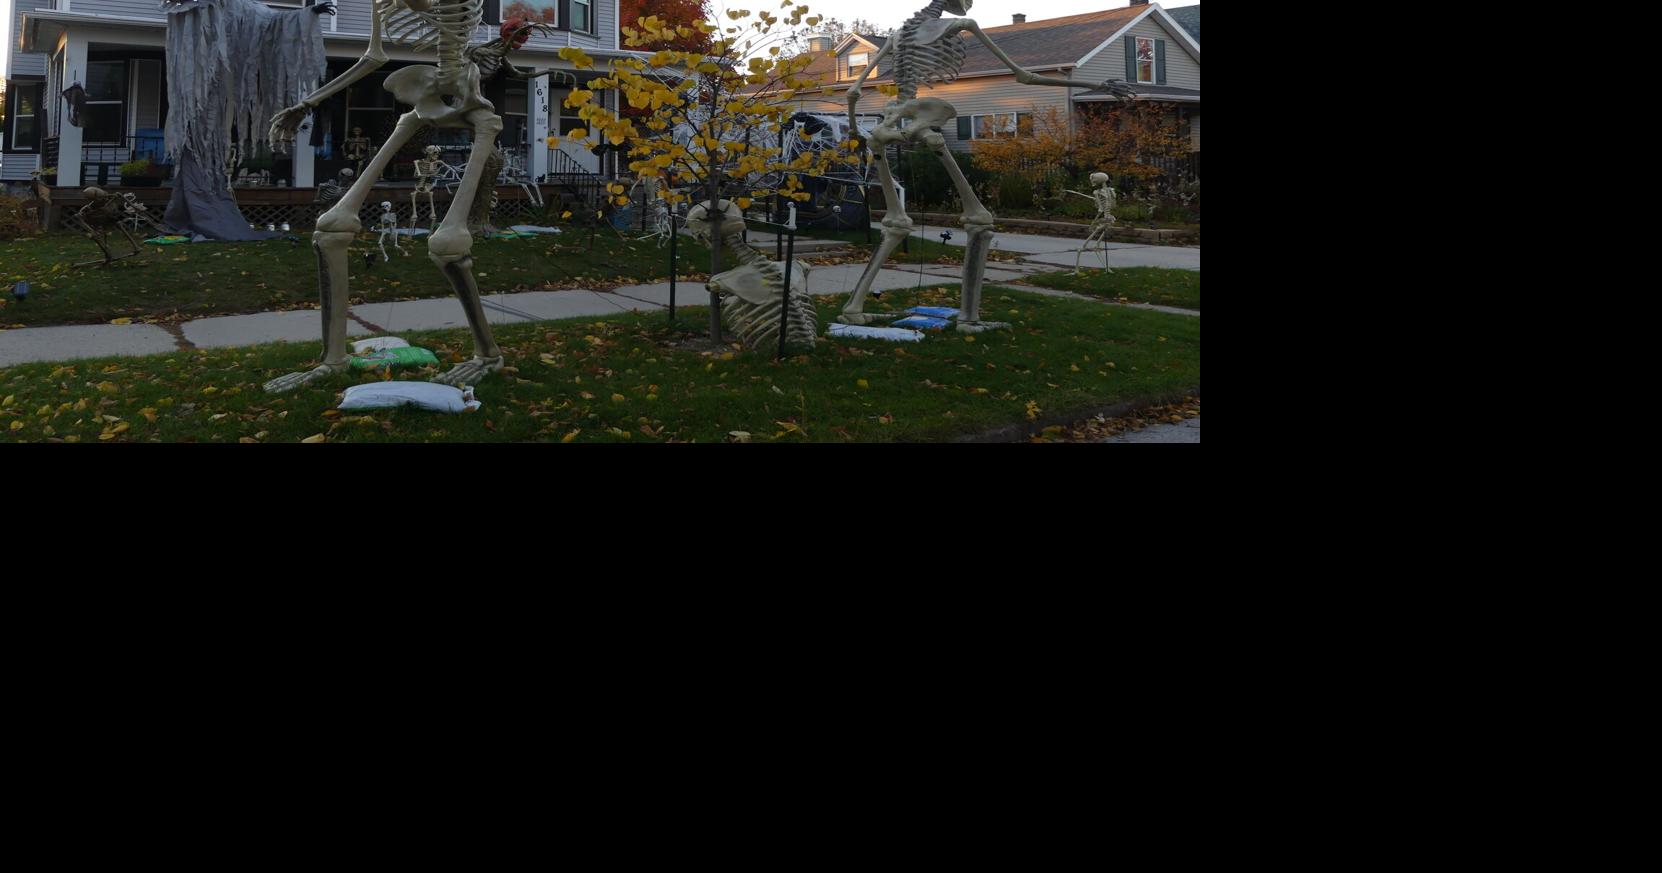 Check out 60 of the spookiest Halloween decorations in the Sheboygan